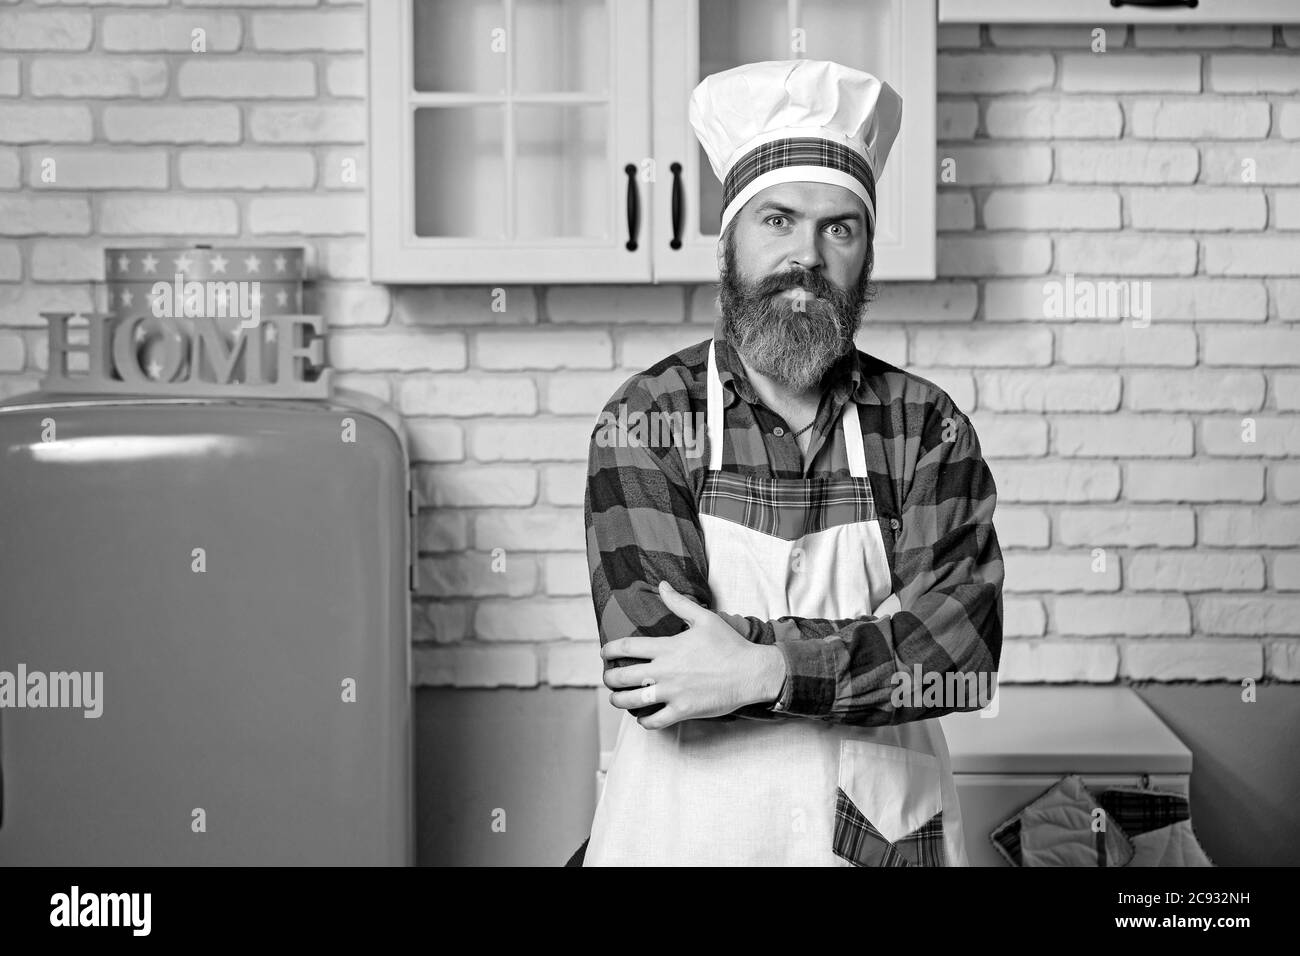 A young bearded man, dressed in a red shirt and white apron. Stock Photo